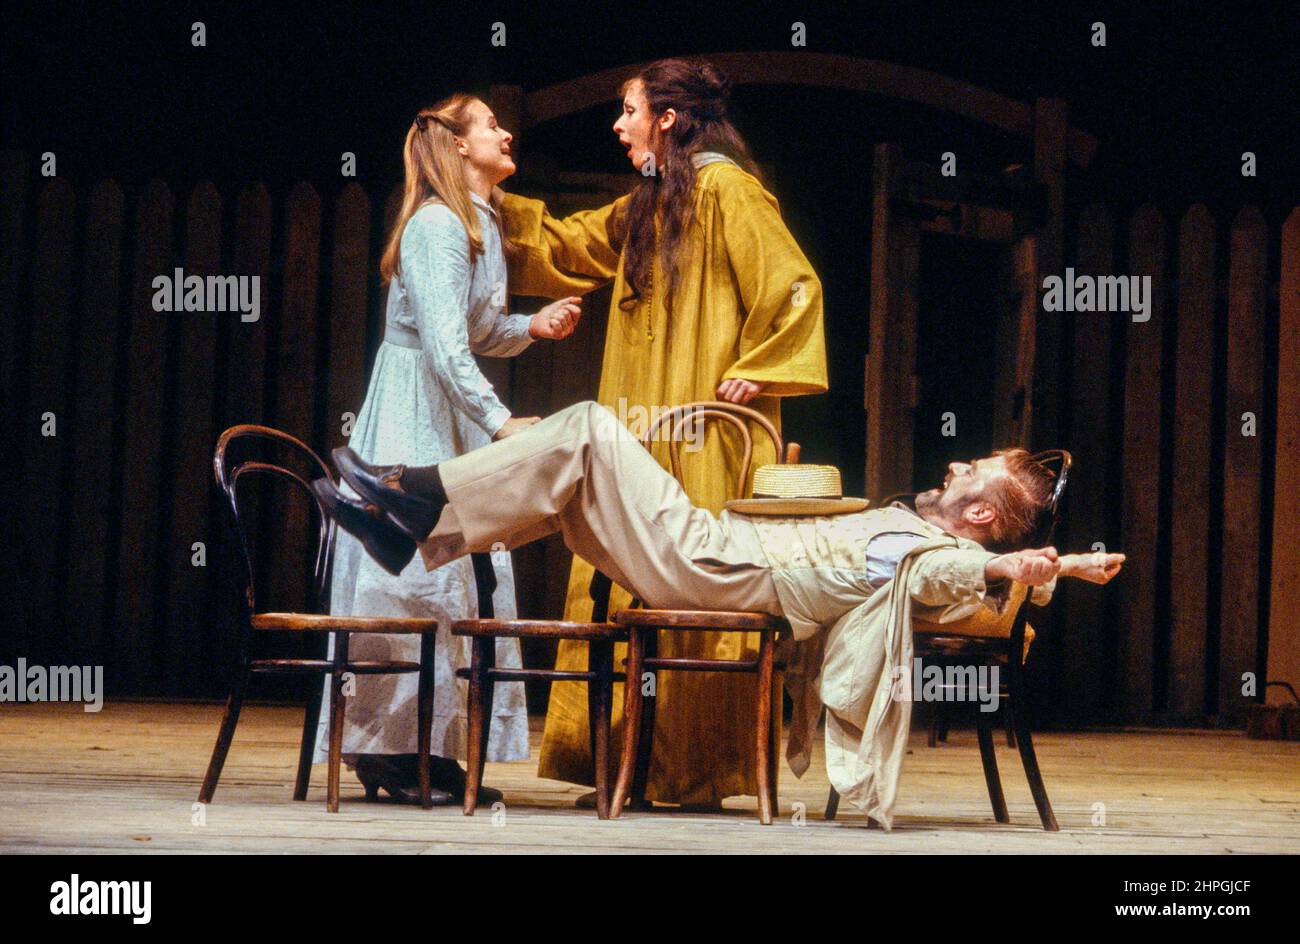 l-r: Sinead Cusack (Elizaveta Fiodorovna / Lisa), Carmen du Sautoy (Elyena Nikolaevna Protassov), Norman Rodway (Pavel Fiodorich Protassov) in CHILDREN OF THE SUN by Gorky at the Aldwych Theatre, London WC2  09/10/1979  a Royal Shakespeare Company (RSC) production  design: Chris Dyer  director: Terry Hands Stock Photo